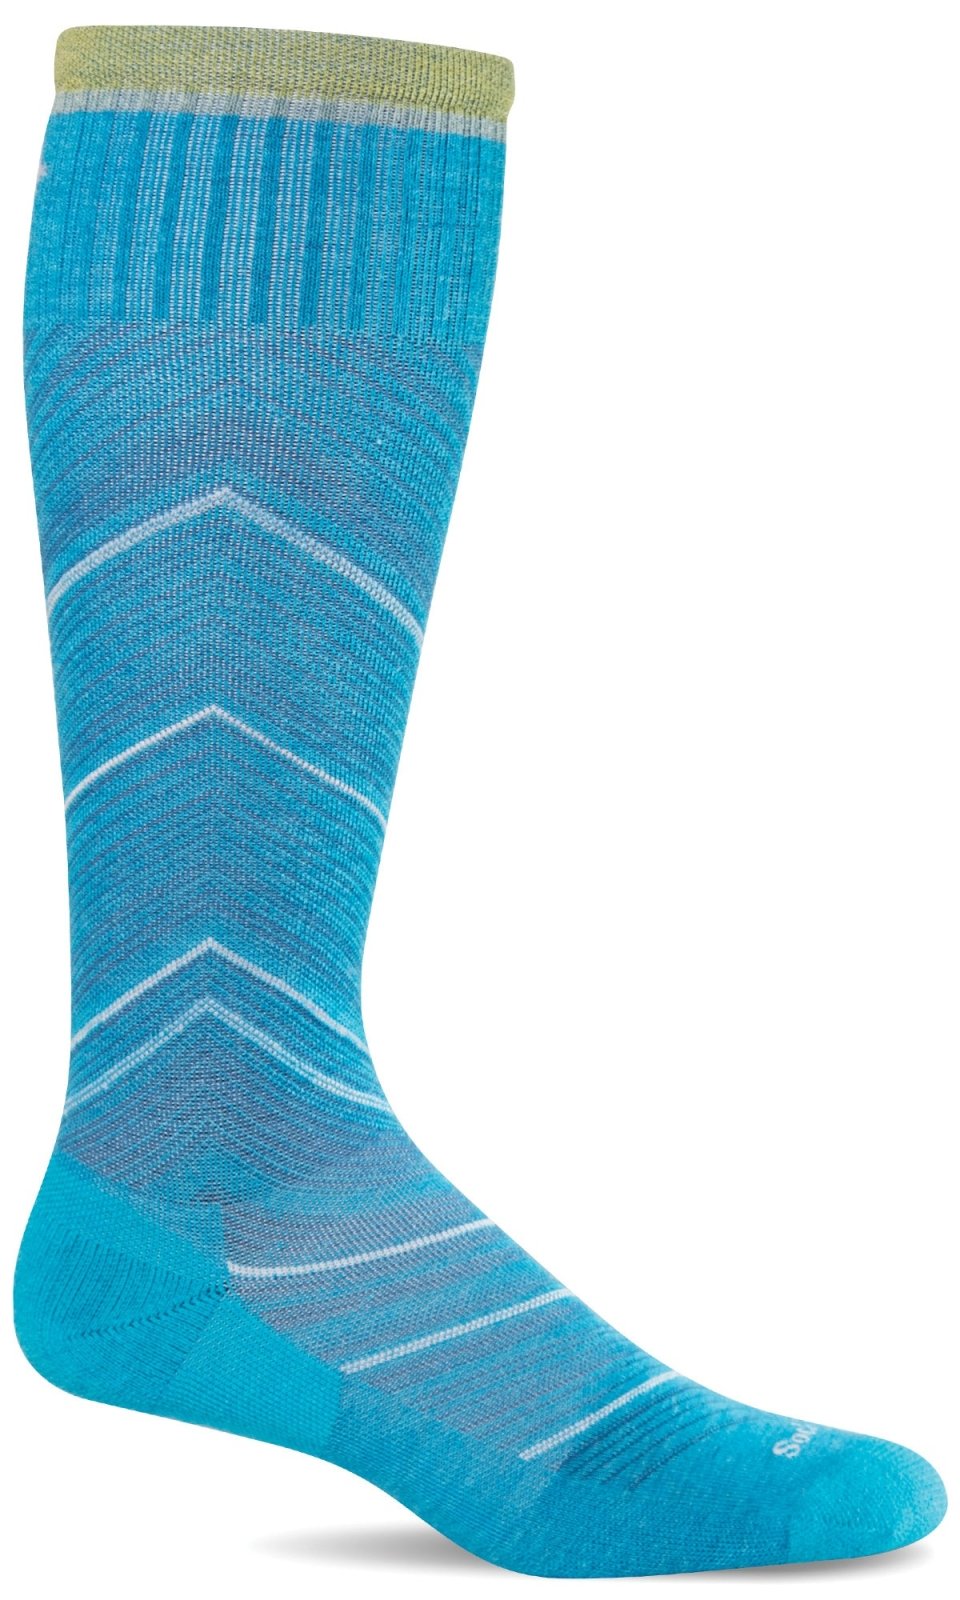 Women's Full Flattery | Moderate Graduated Compression Socks | Wide Calf Fit - Merino Wool Lifestyle Compression - Sockwell